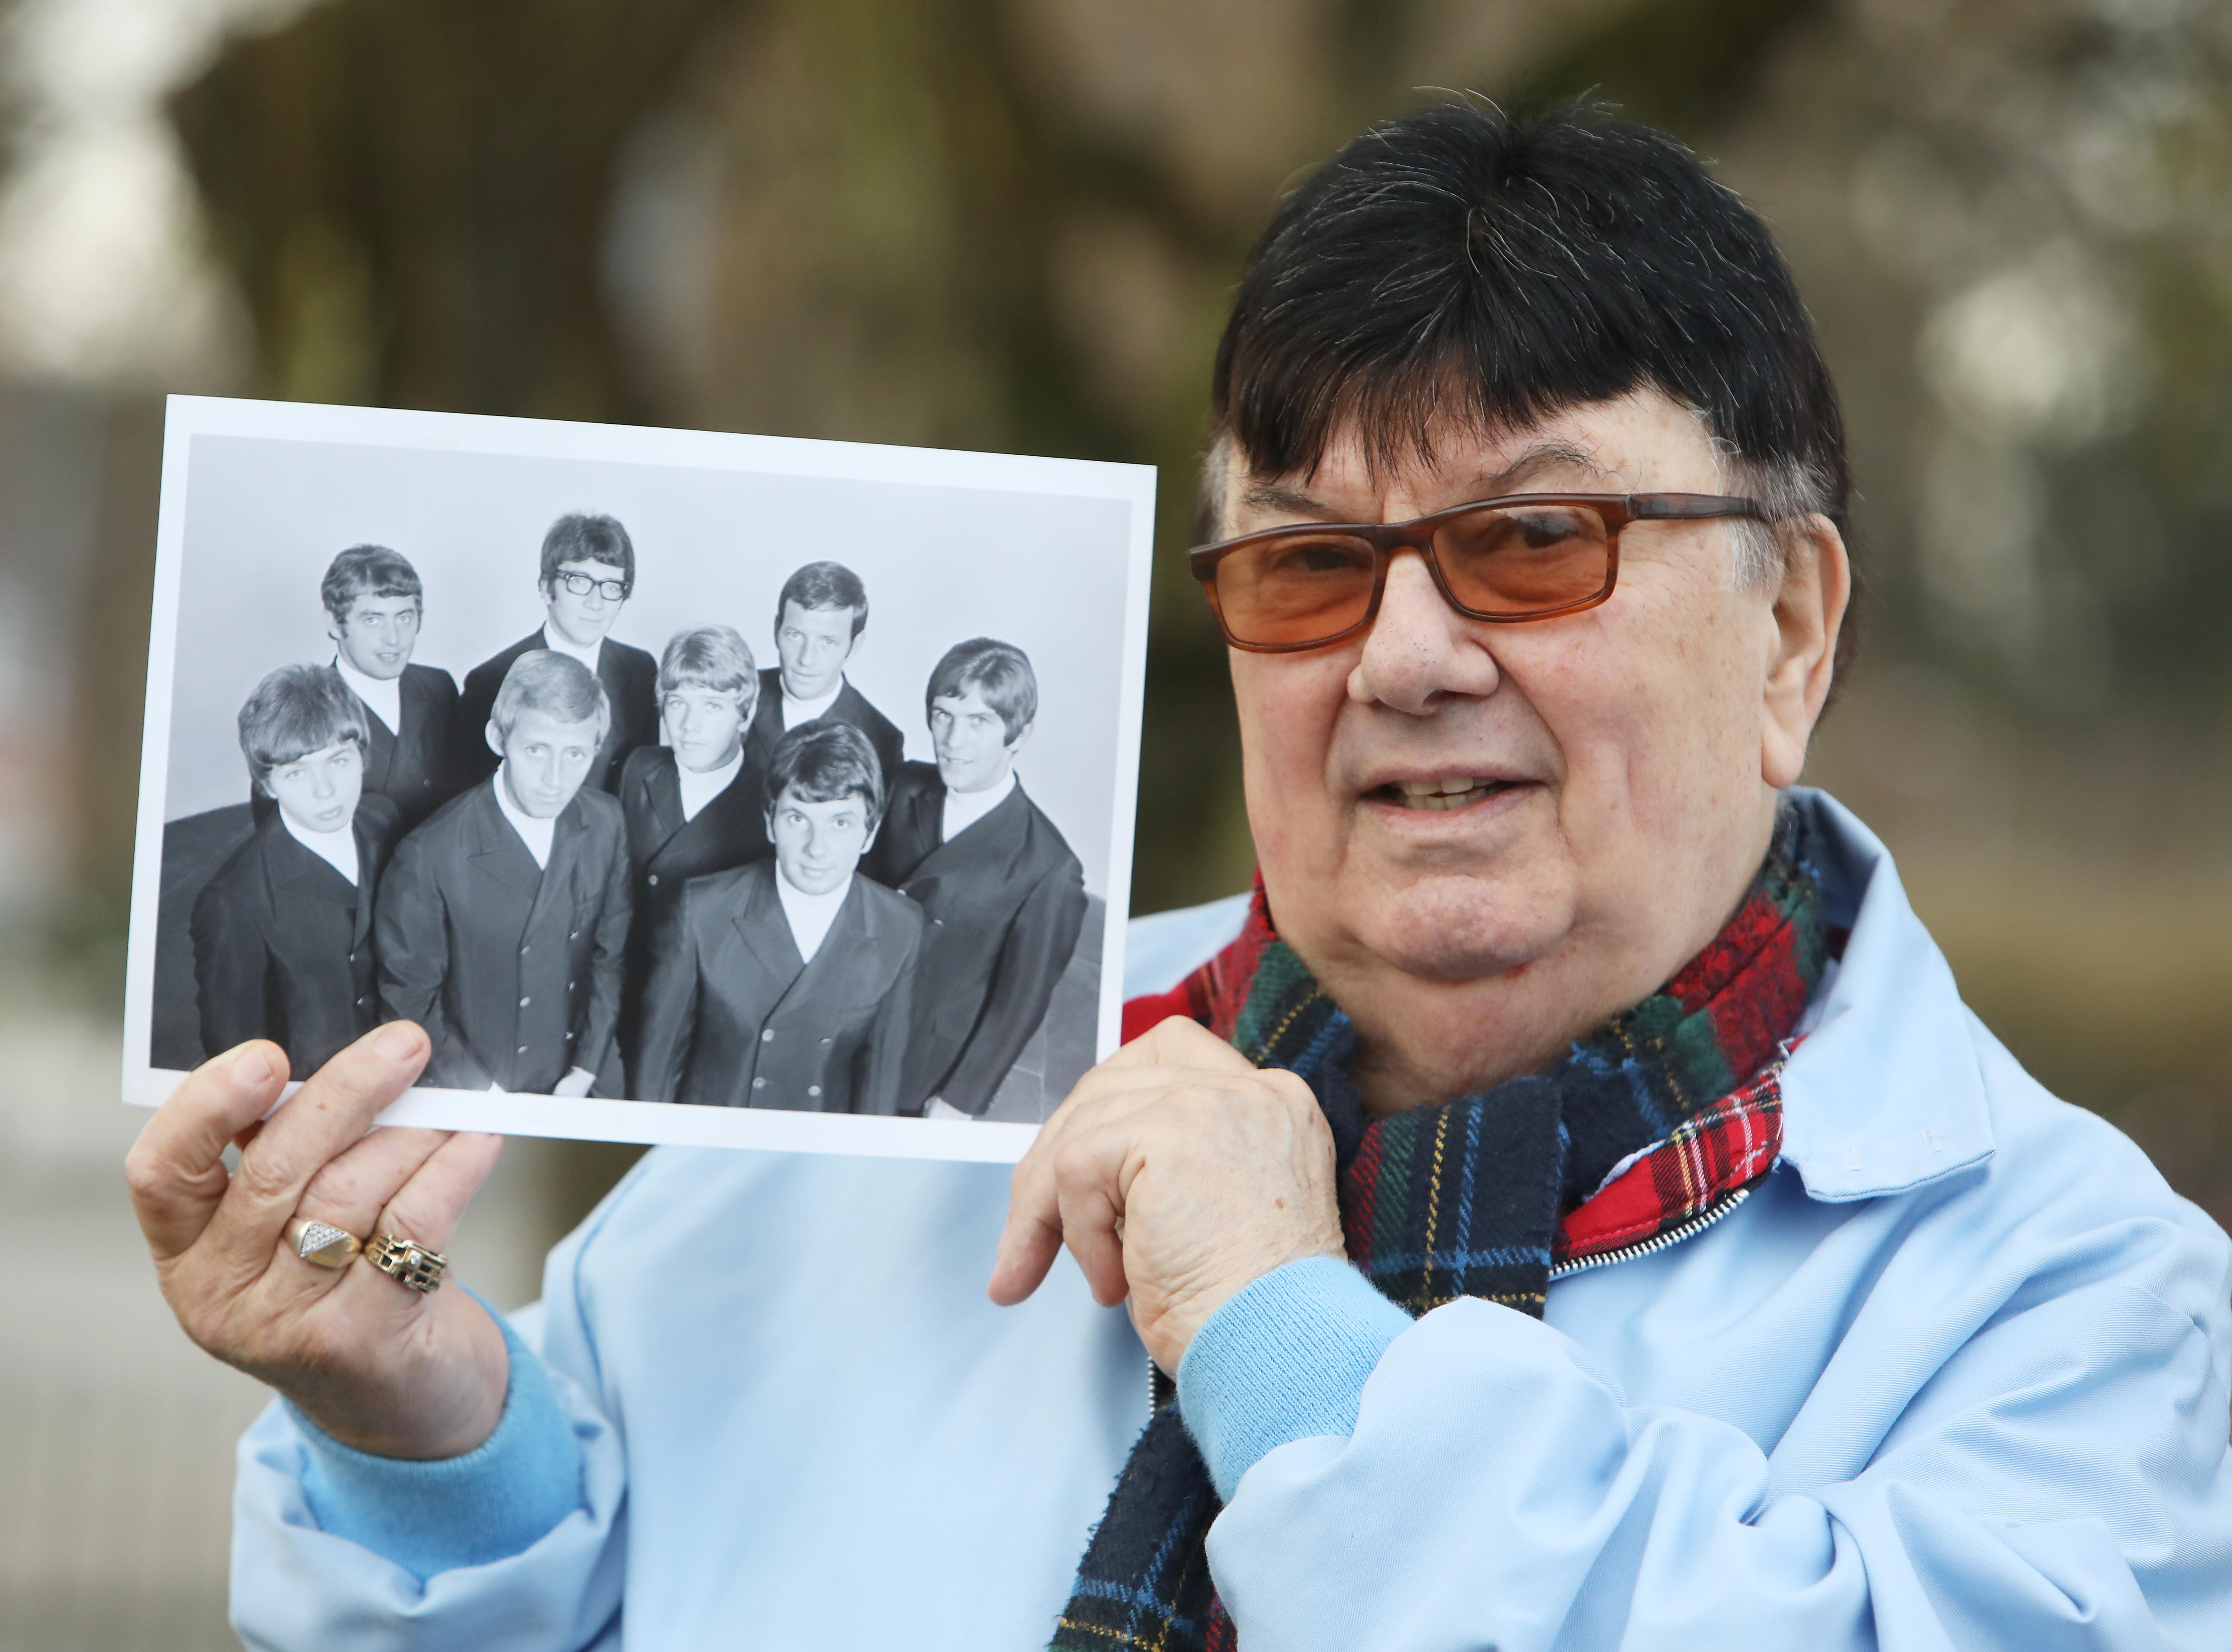 ‘BROTHERS’: Des Lee with a photo of the Miami Showband